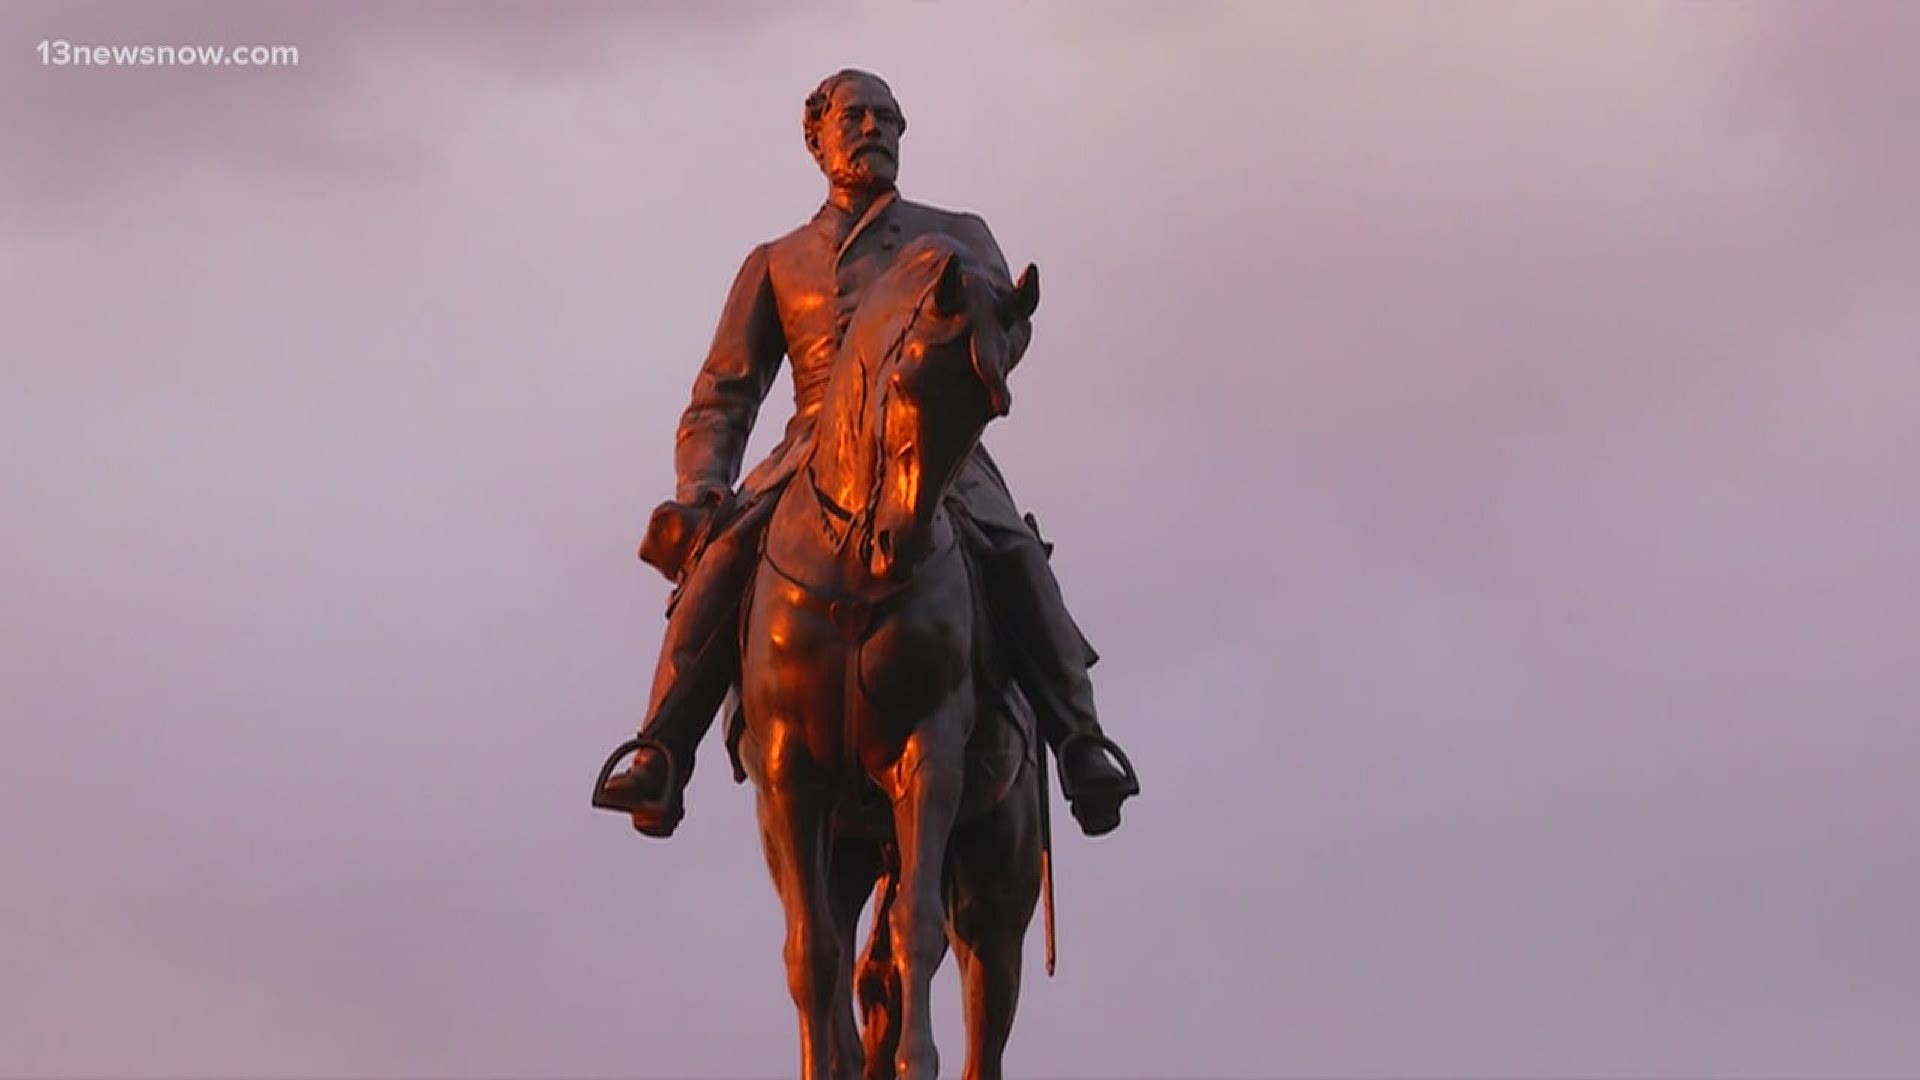 The governor said the statue of Confederate Gen. Robert E. Lee will come down from Monument Avenue as soon as possible. Richmond's mayor said others would, too.